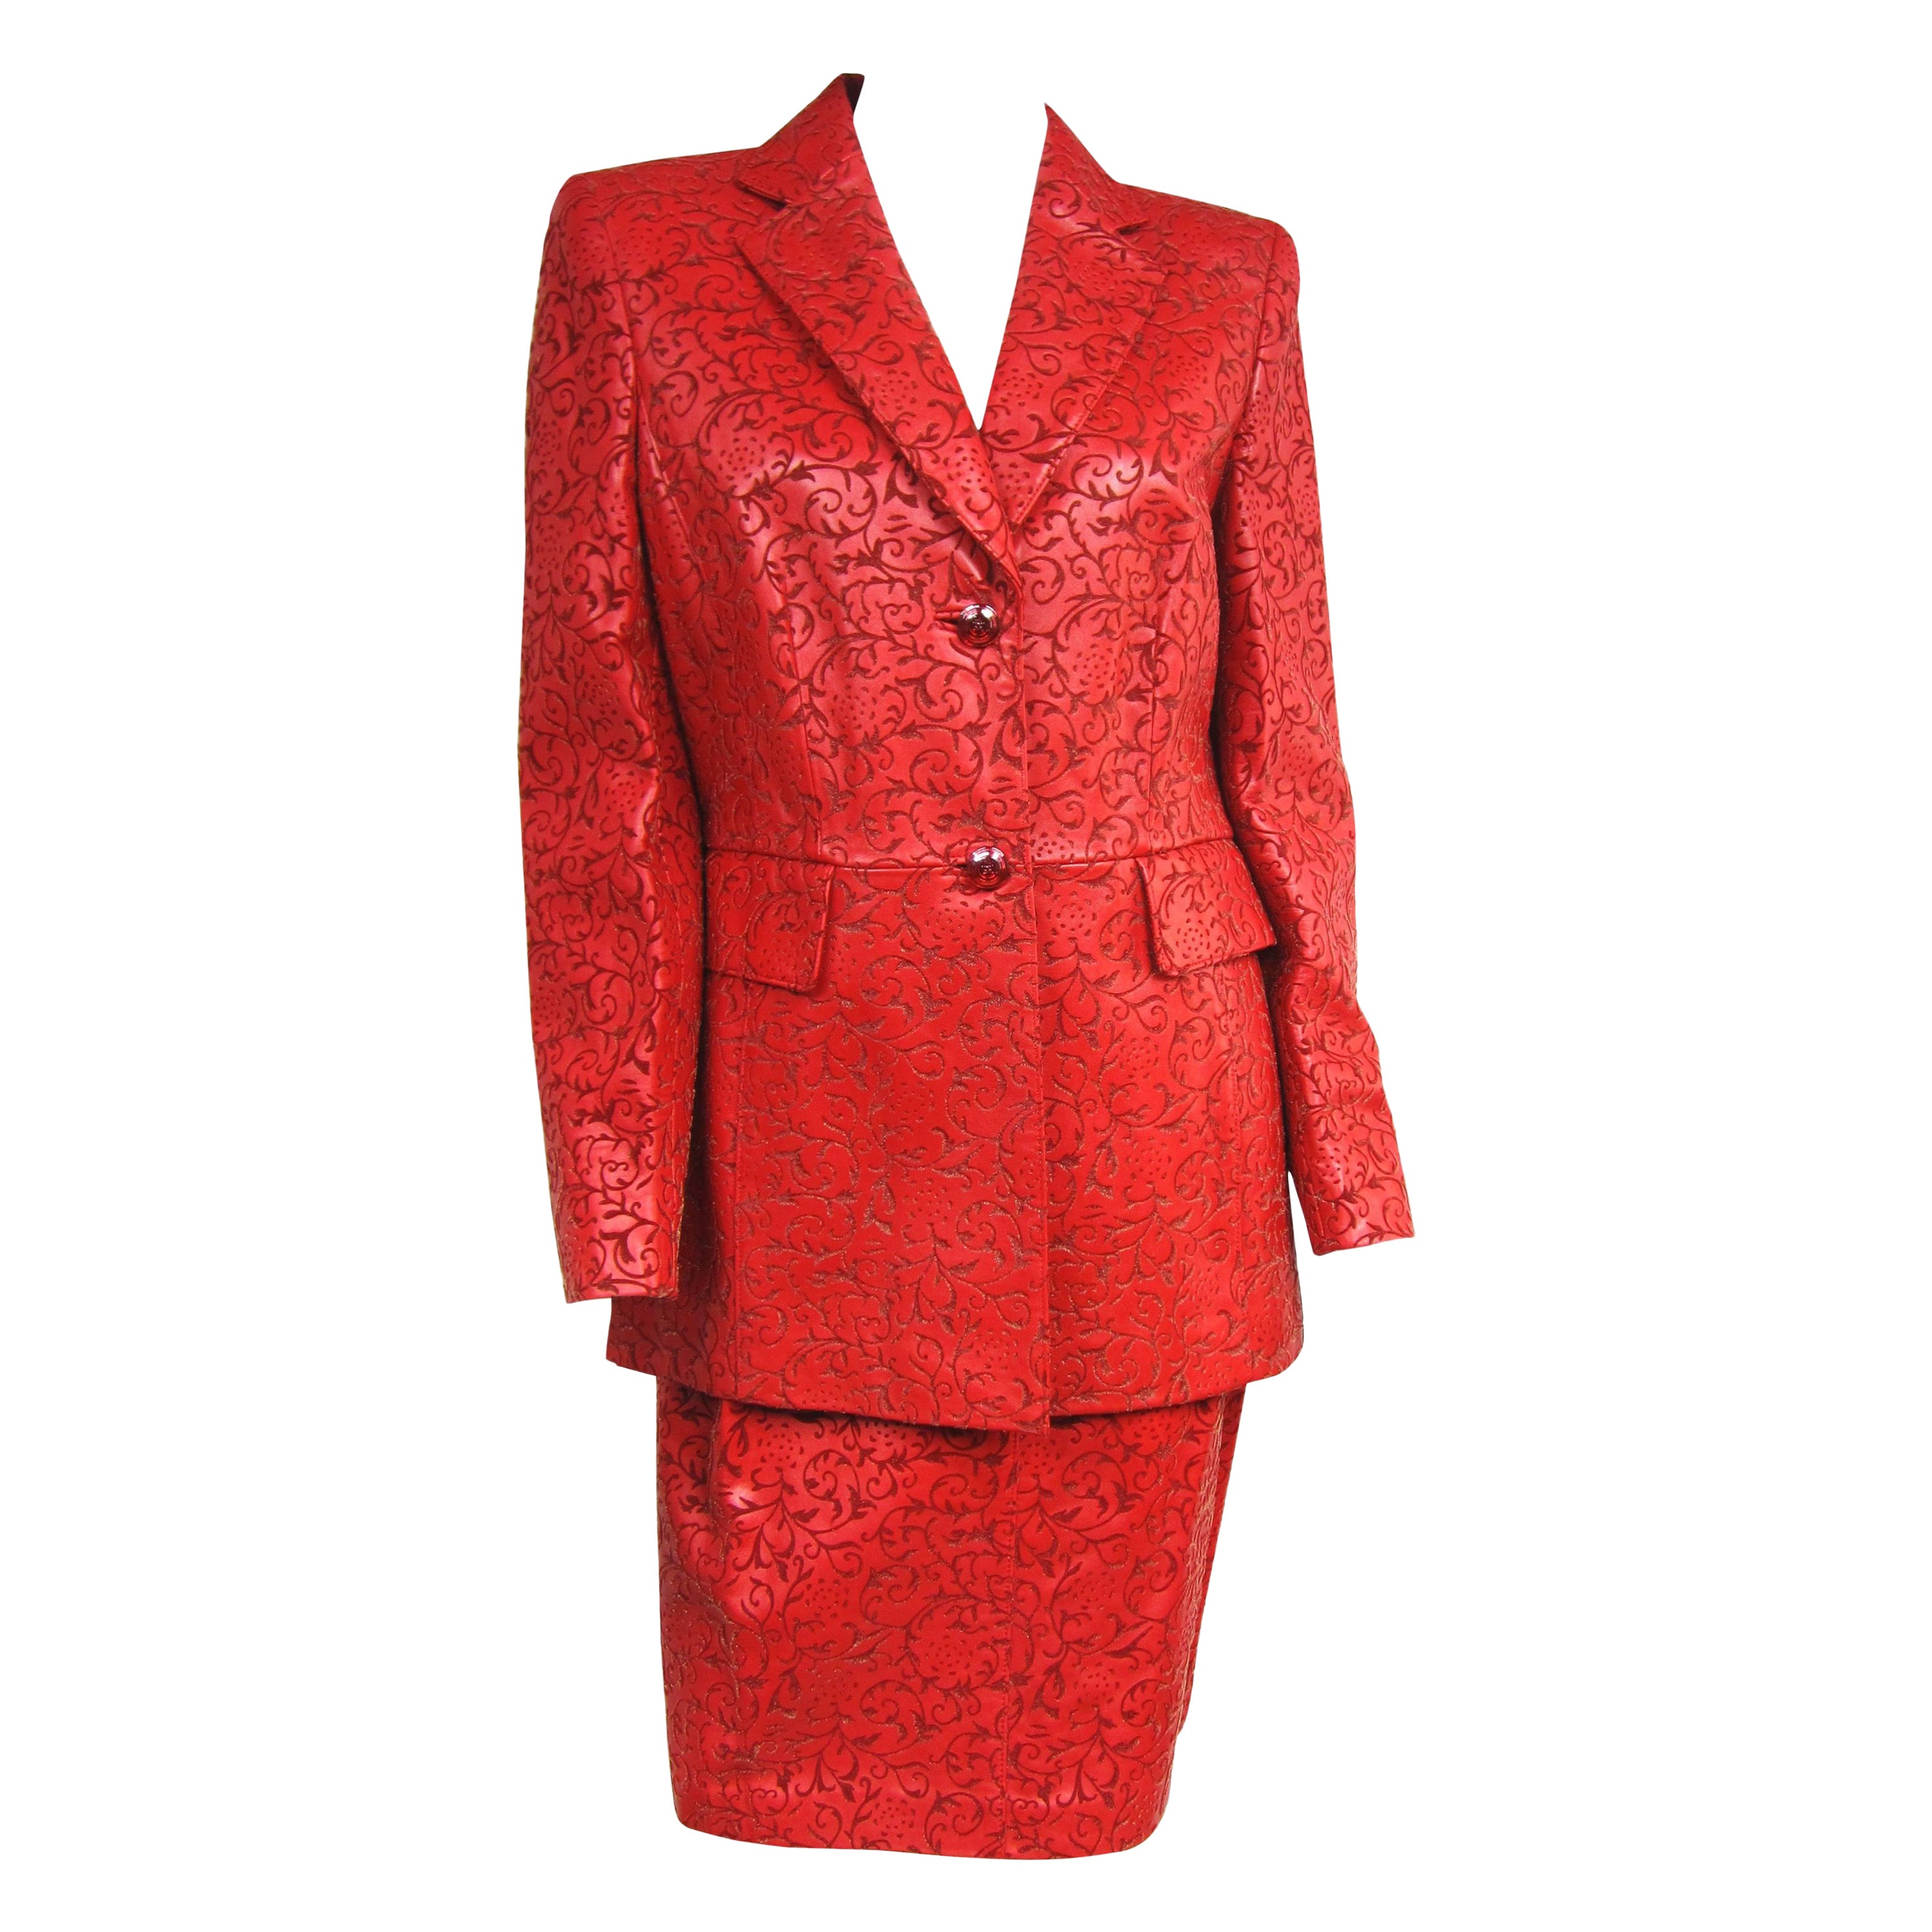 Escada Red Leather Jacket Blazer & Skirt  Paisley Embossed  New with tags For Sale